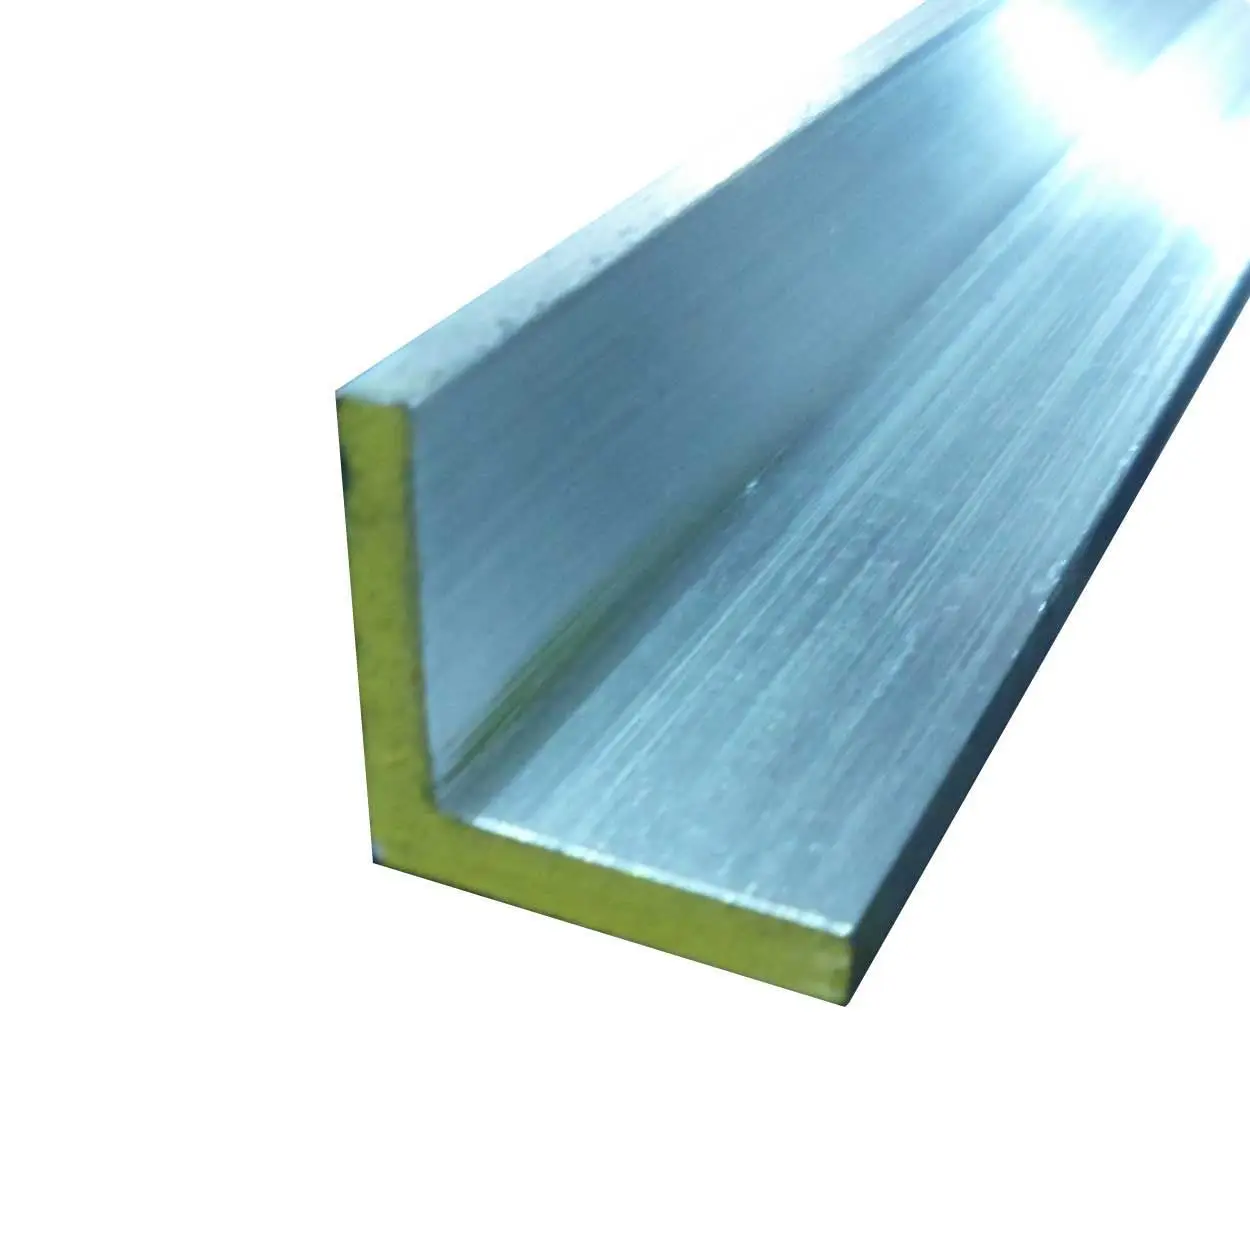 2 x 2 x 1/4 x 48 long Aluminum architectural angle 6063 Mill Finish 